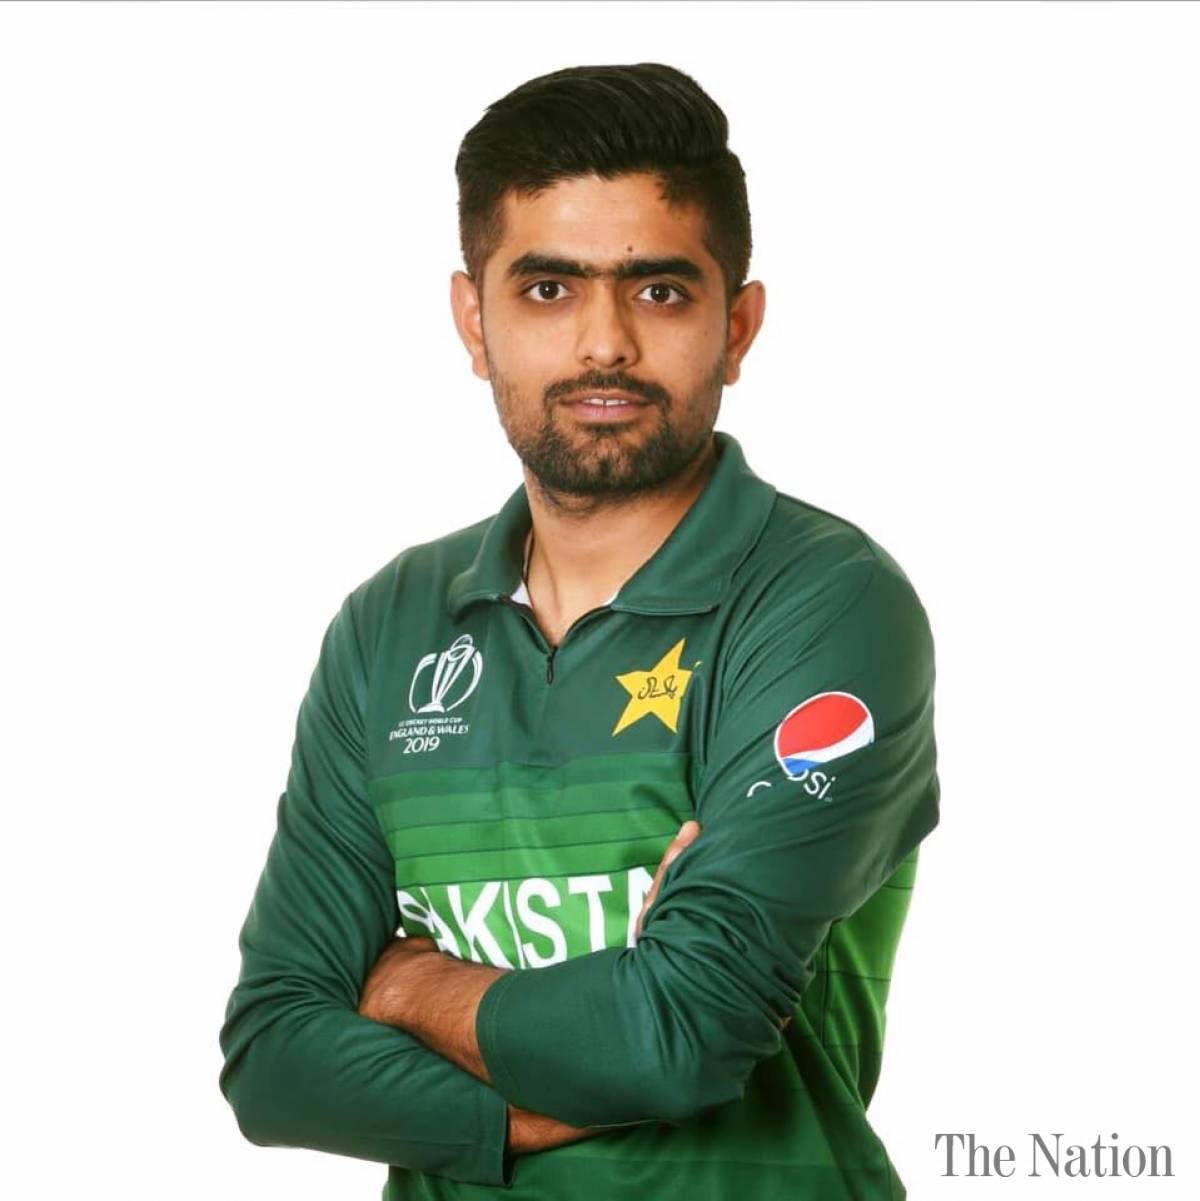 2019-was-a-great-year-for-me-says-babar-azam-1577821617-3912.jpg